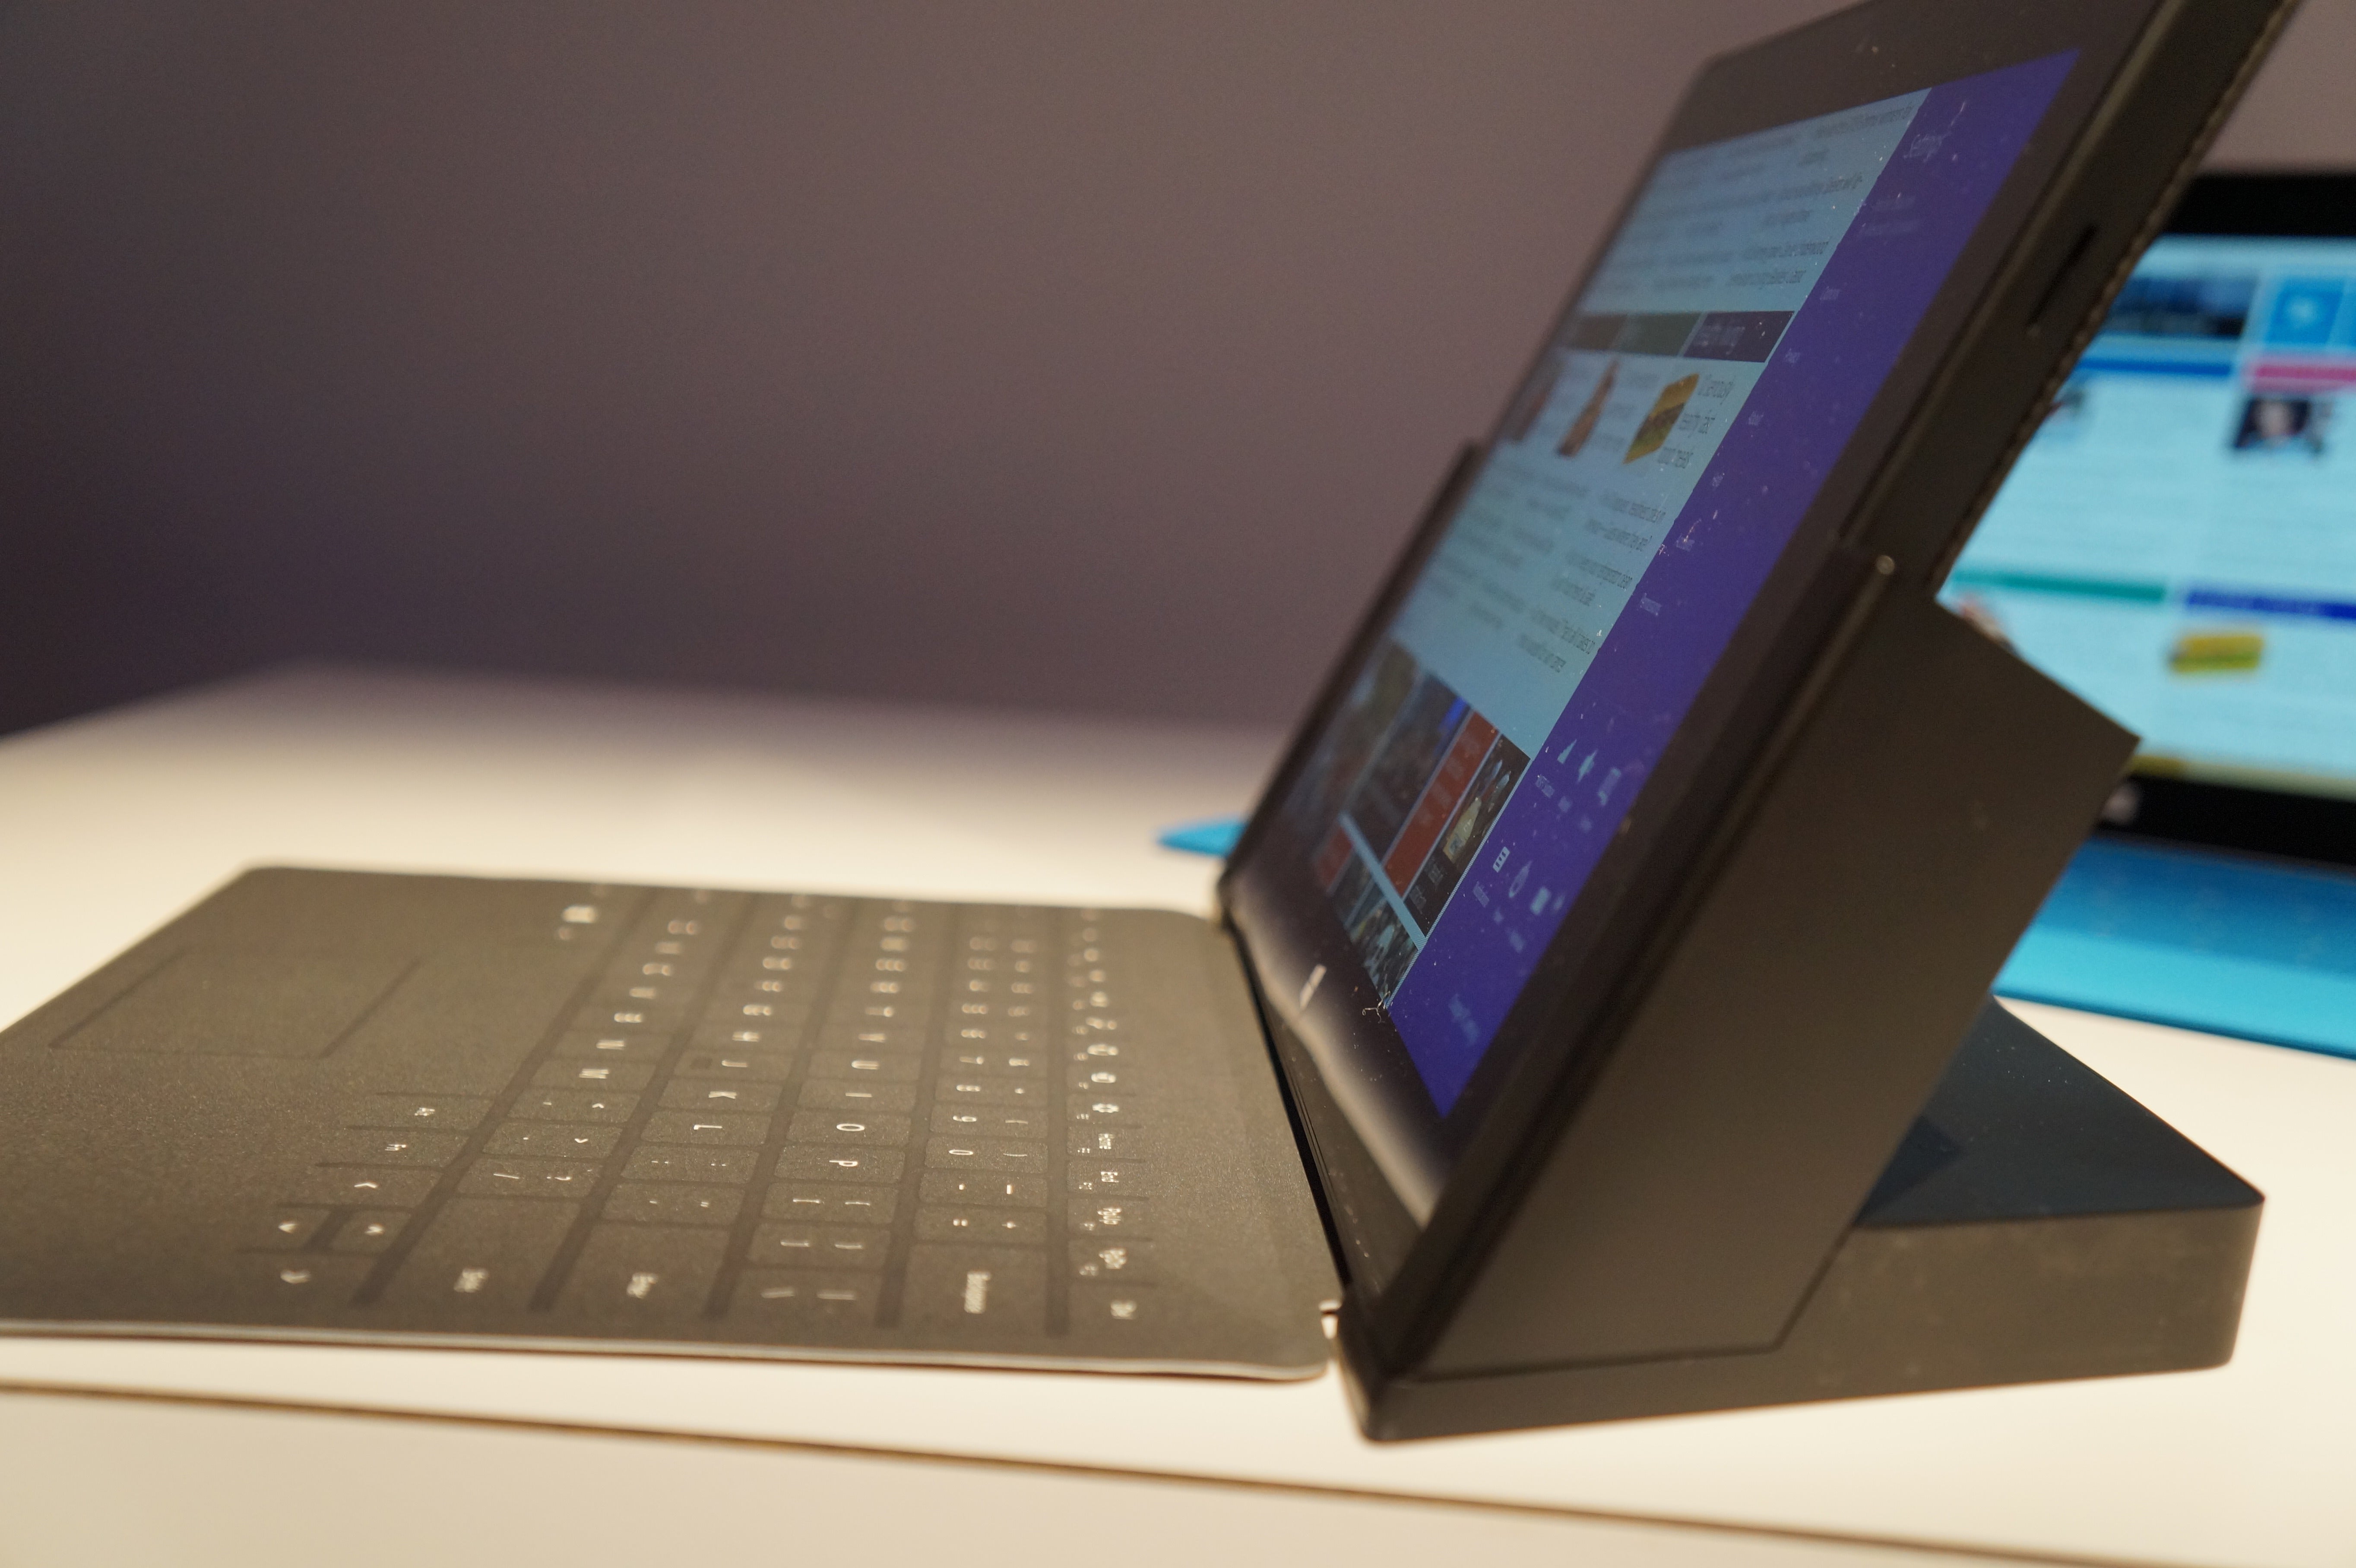 How The Surface Pro 2 Became My Favorite Computer Pcworld